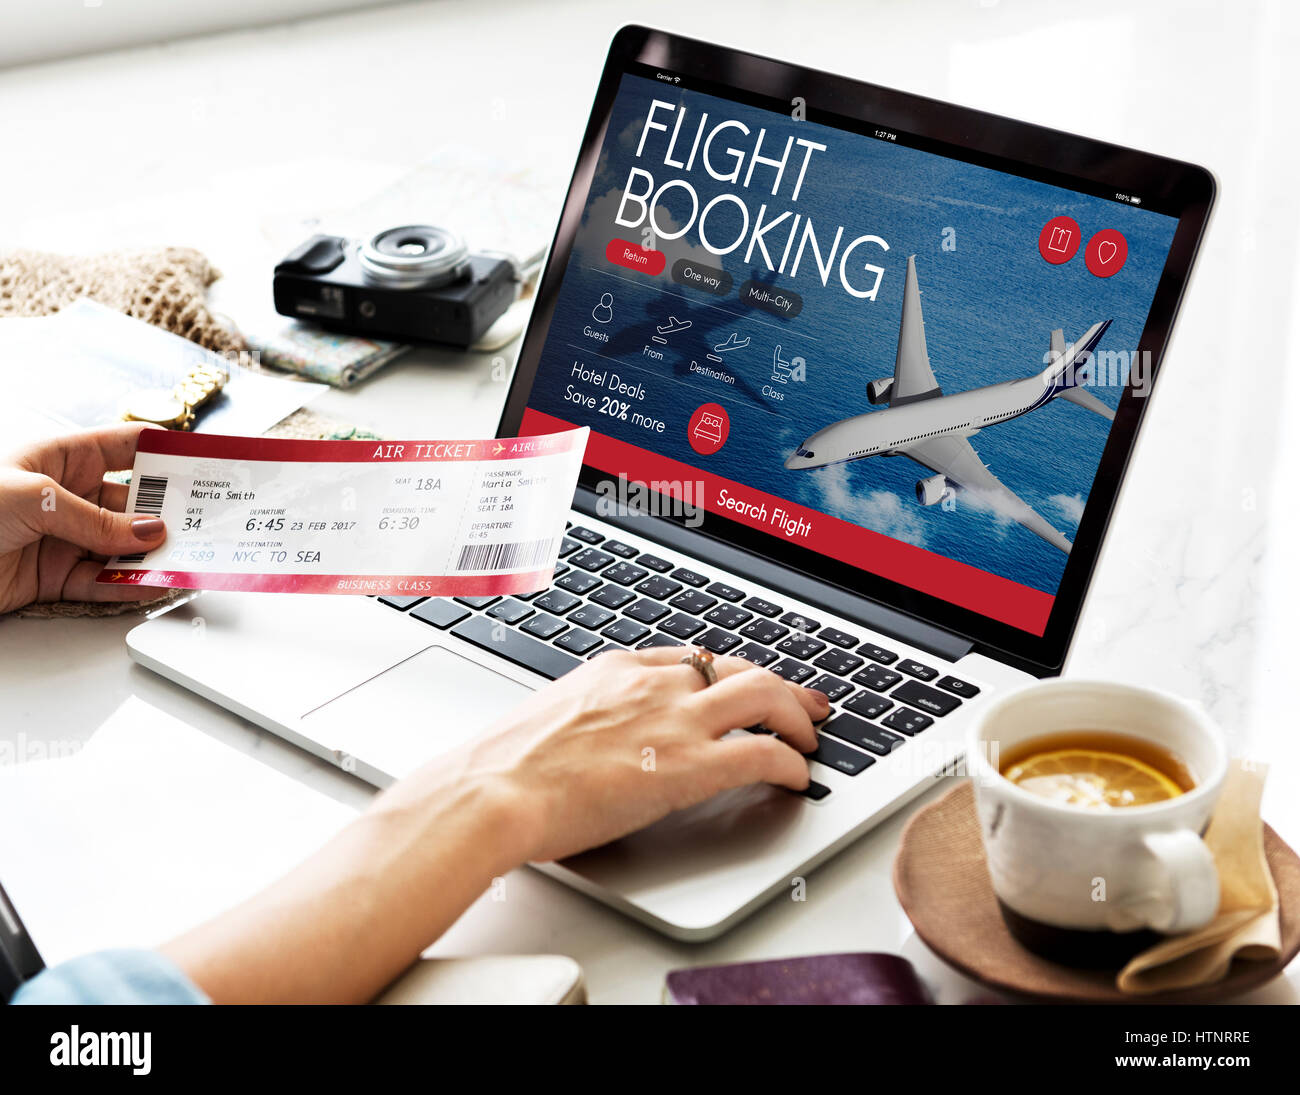 Air Ticket Flight Booking Concept Stock Photo